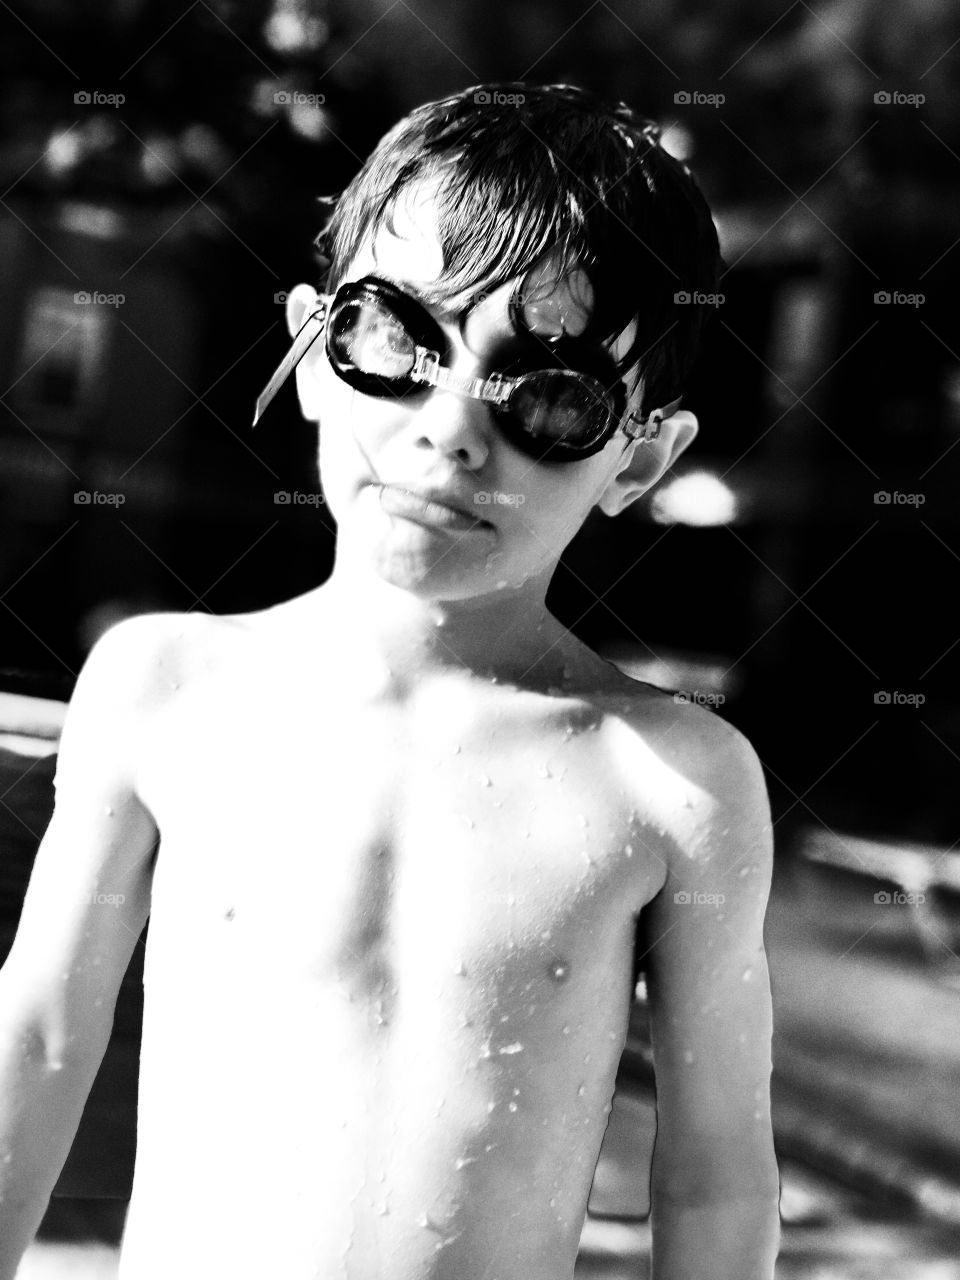 My son posing while swimming this summer